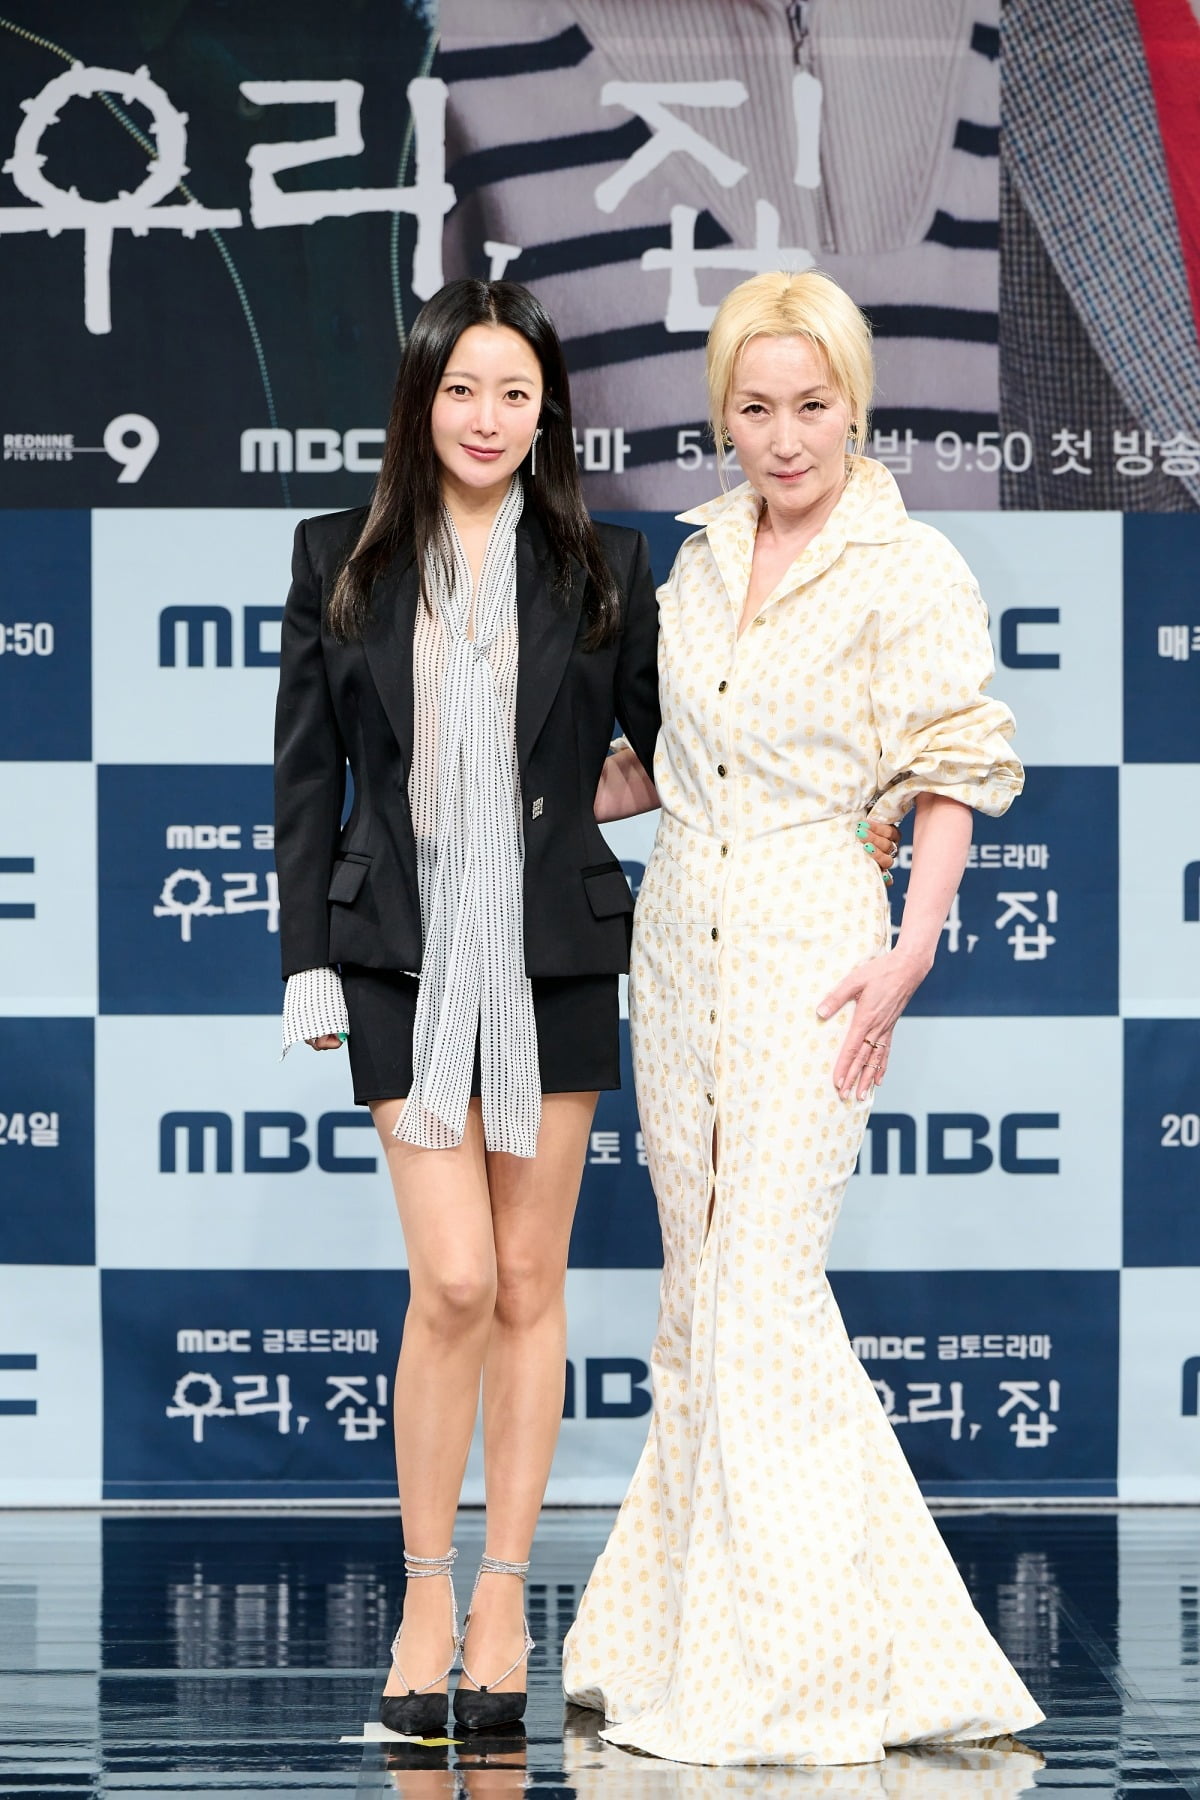 Lee Hye-young "I've never seen Kim Hee-sun act before"